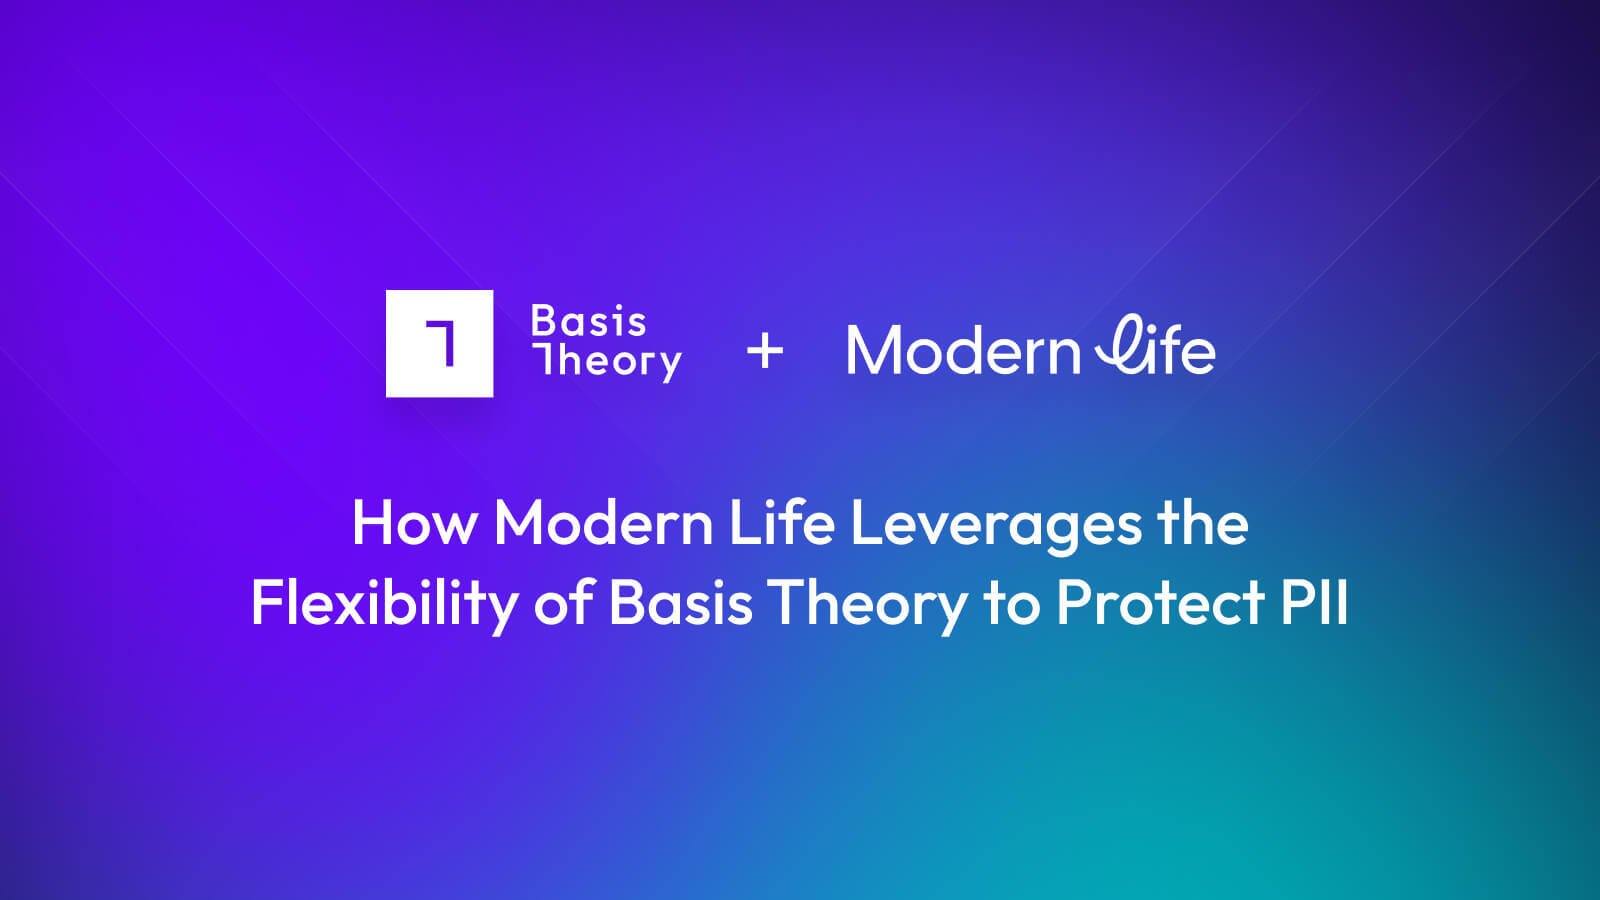 Modern Life protects PII with Basis Theory